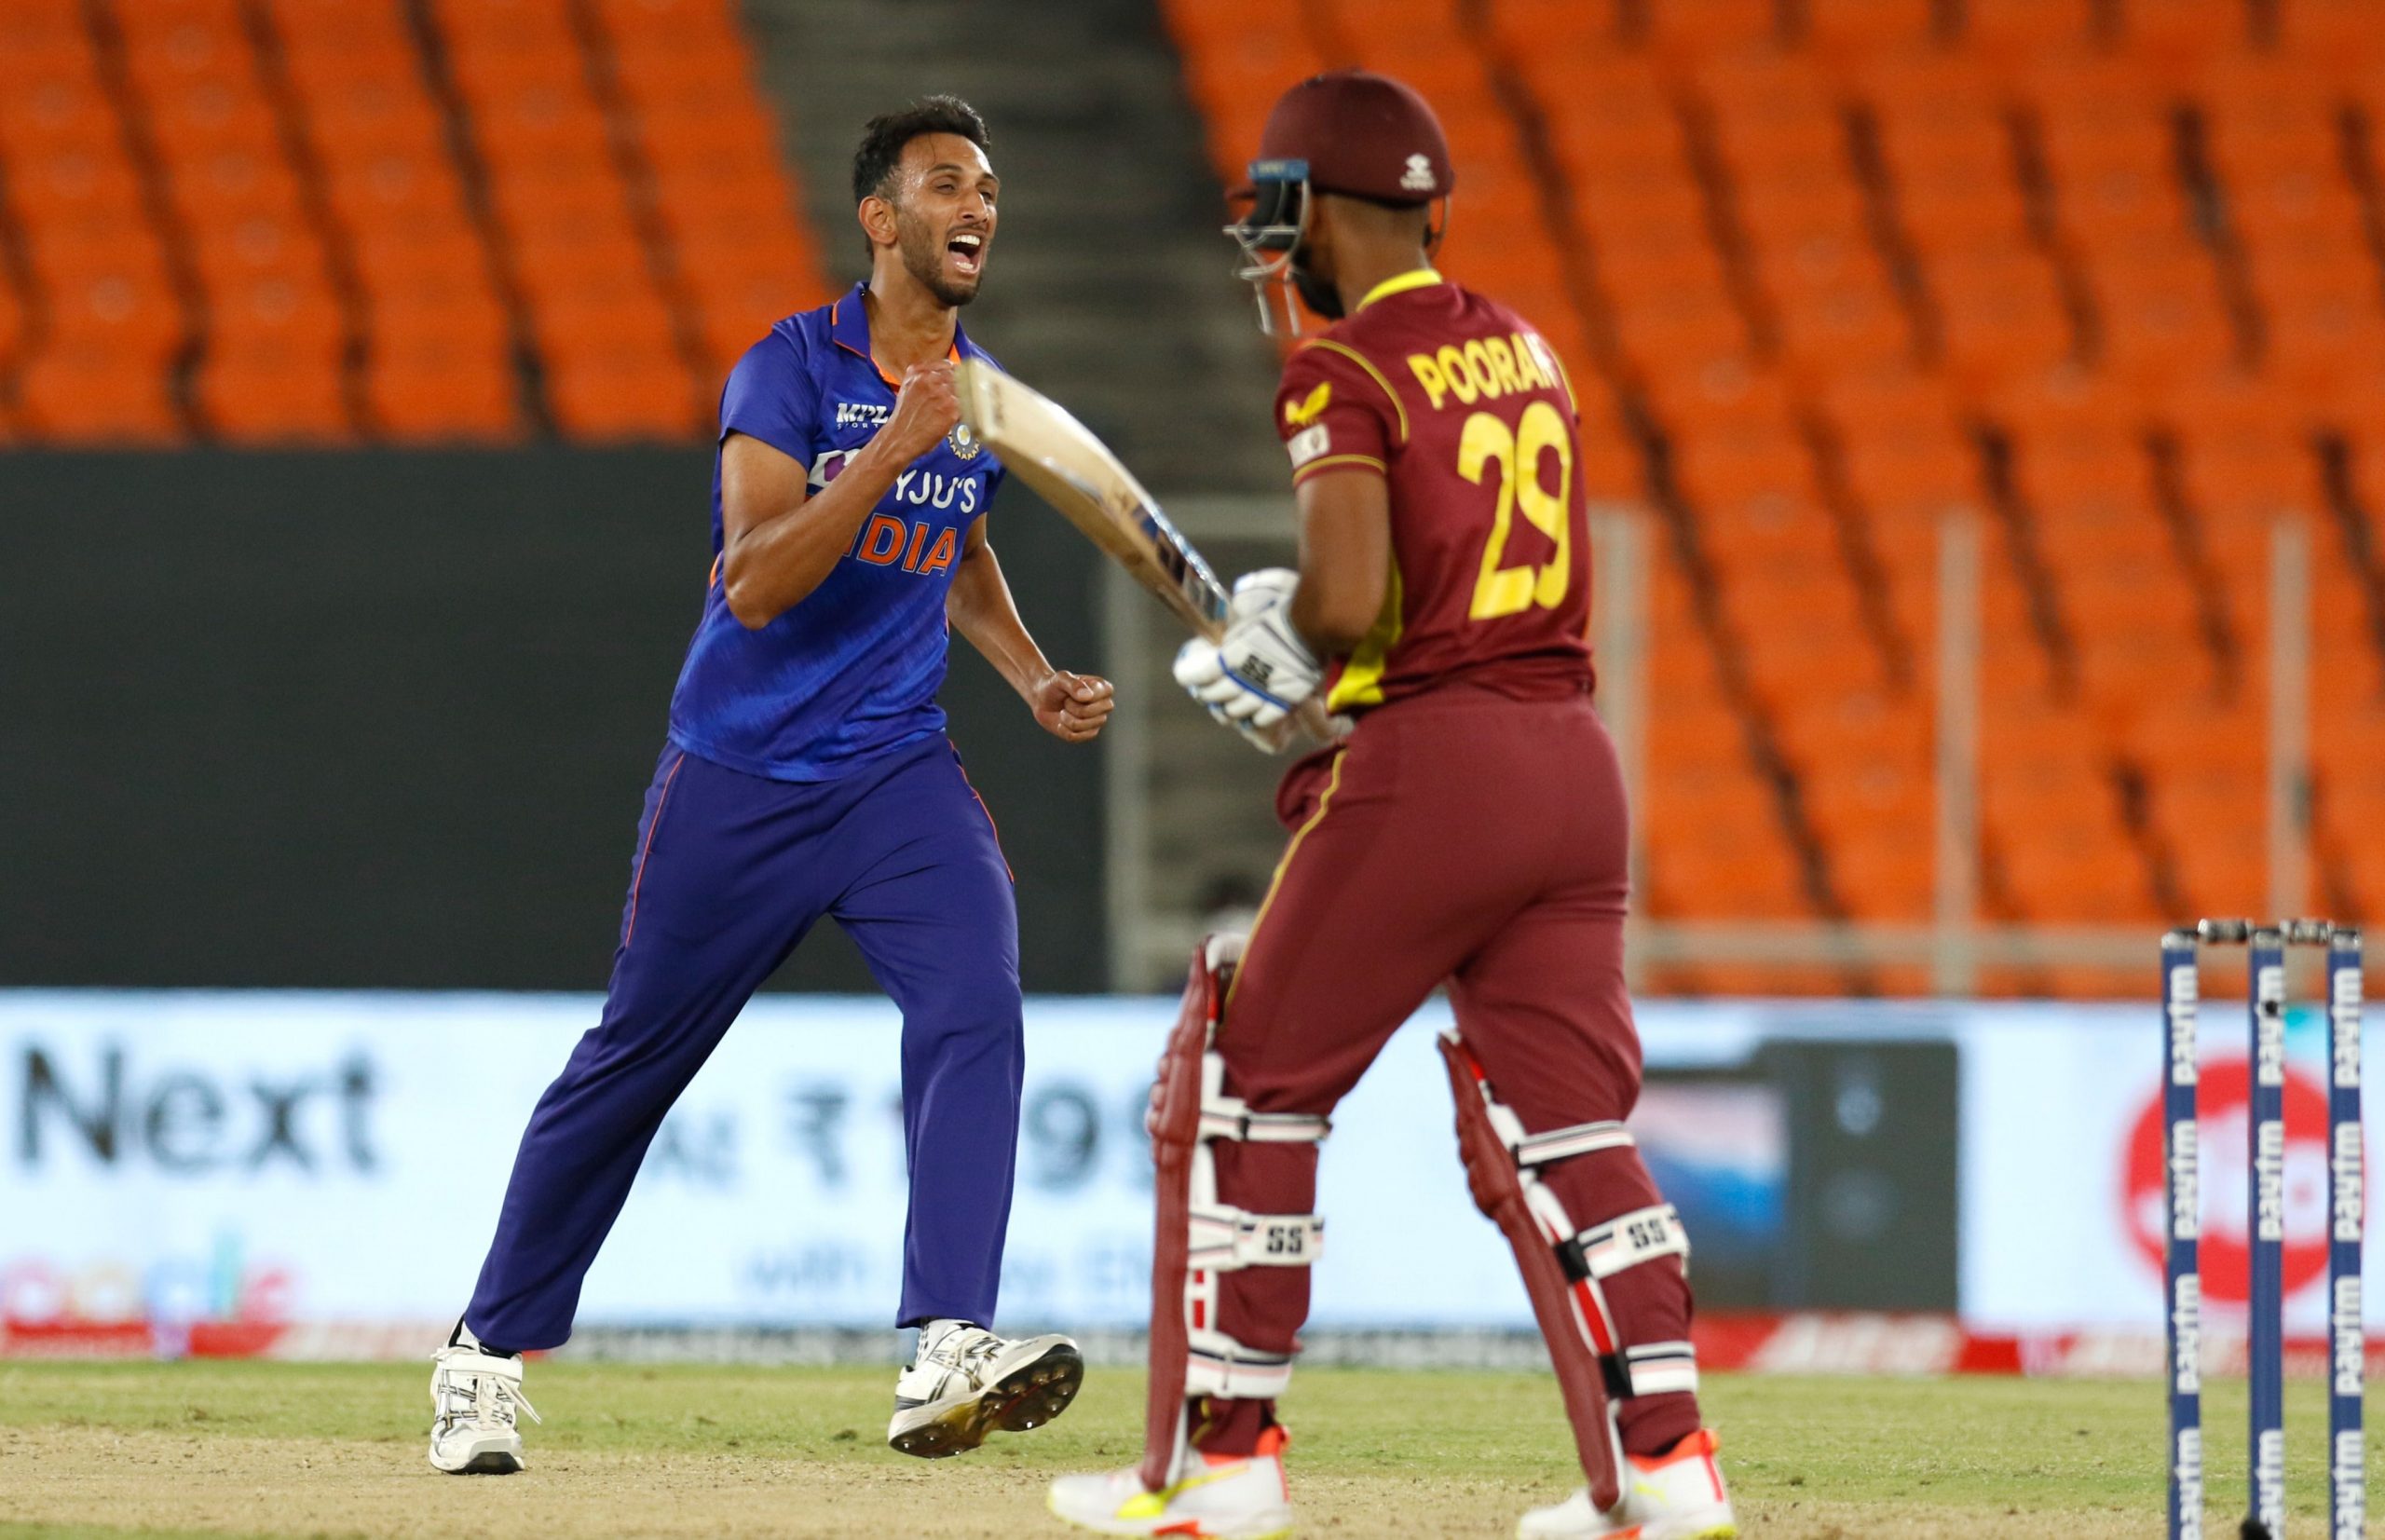 India vs West Indies 1st ODI: When and where to watch